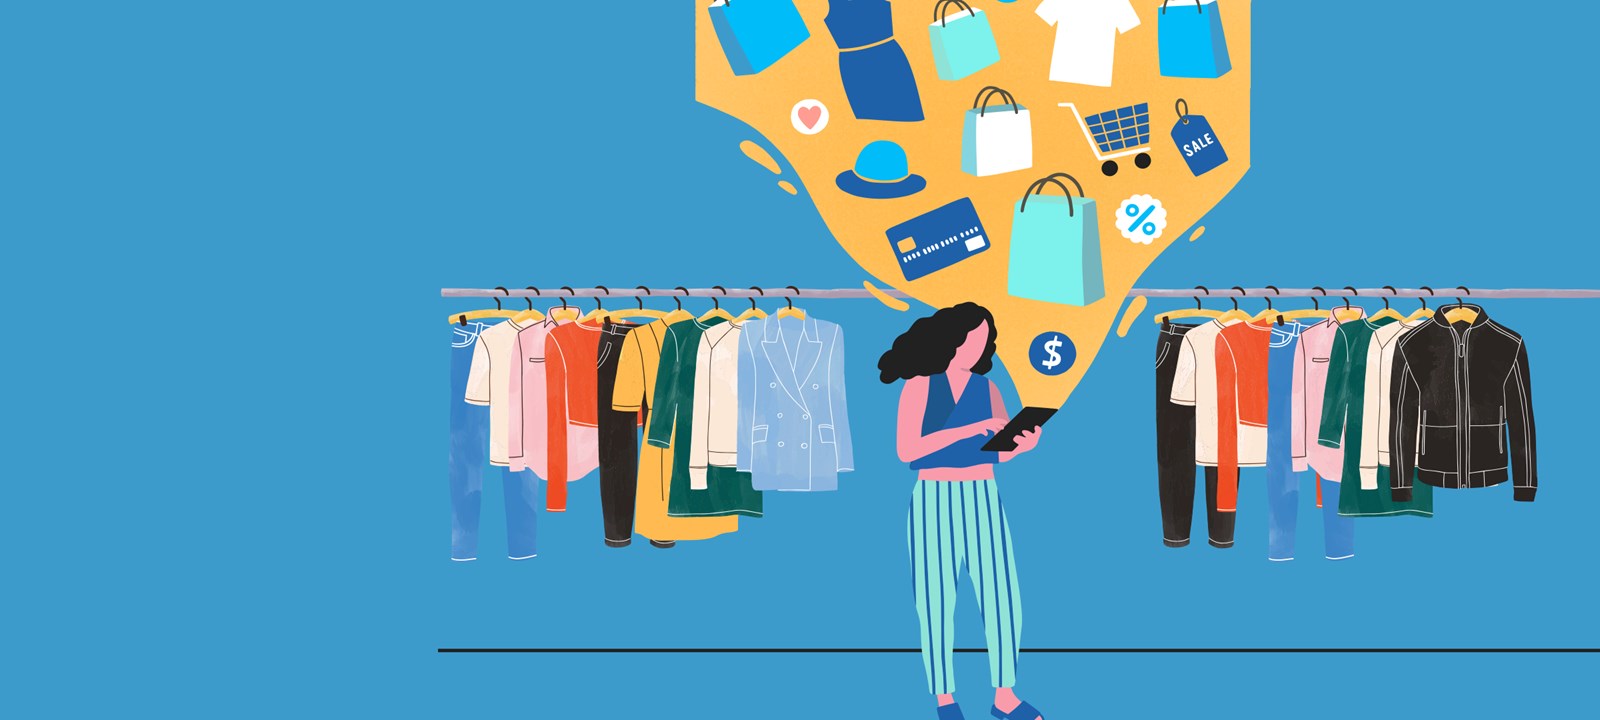 Beyond a Mere Transaction - 
Future of Retail Series part 3: Retail Experience